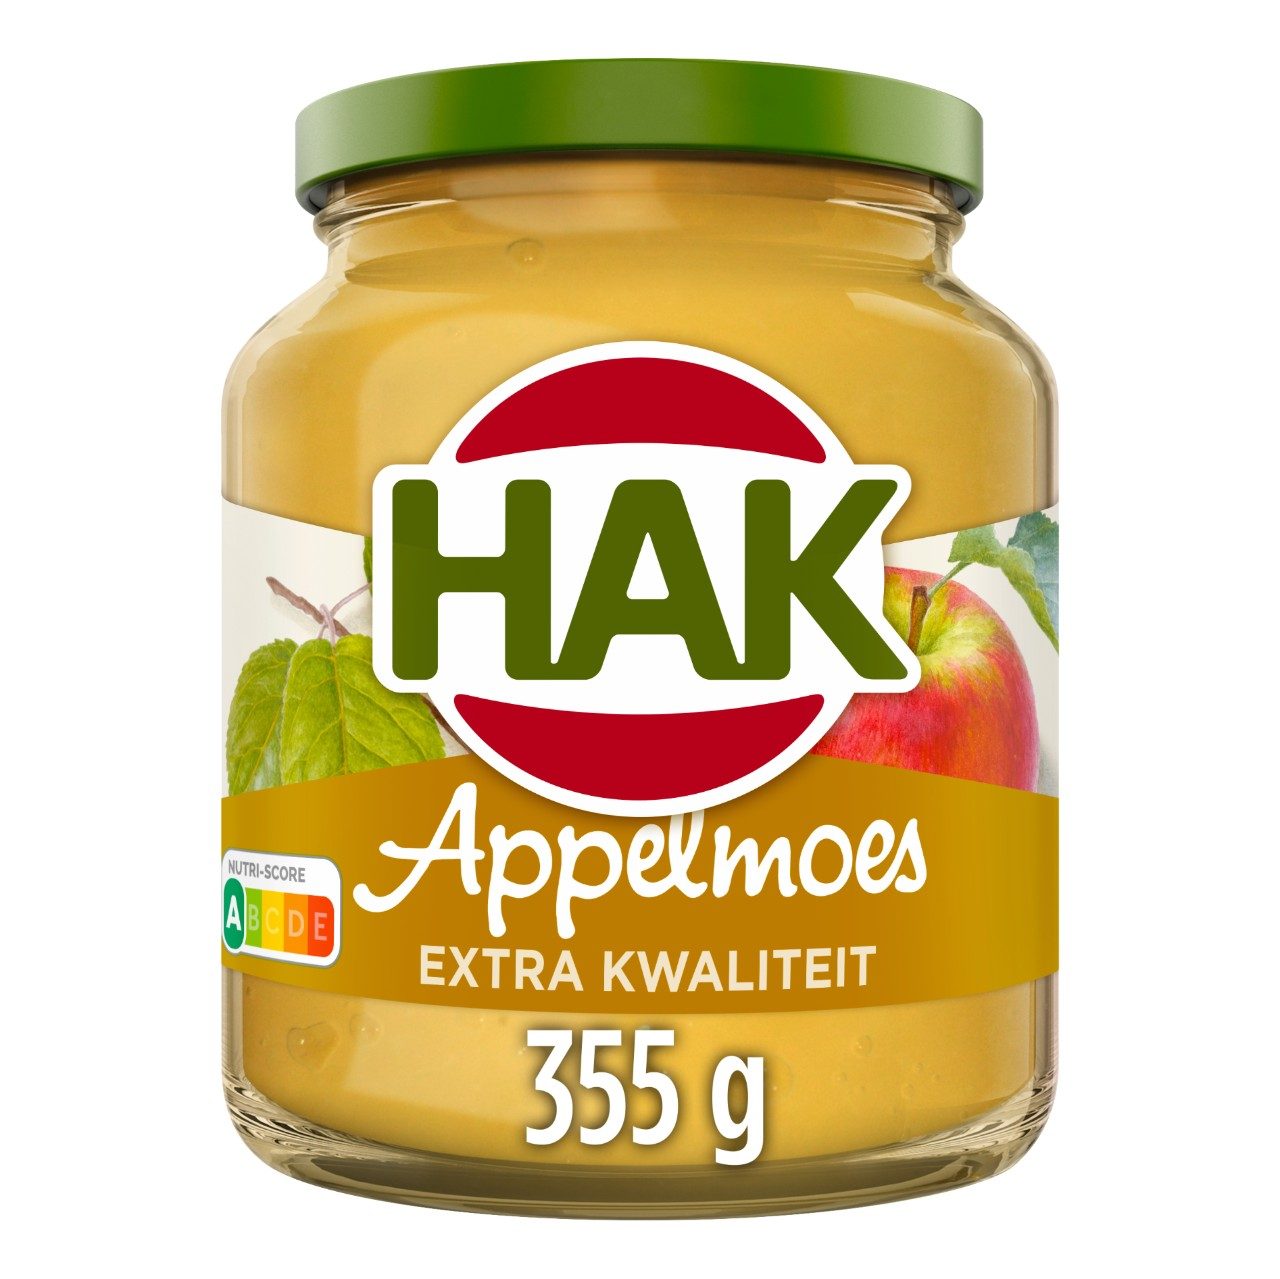 Appelmoes extra kwaliteit